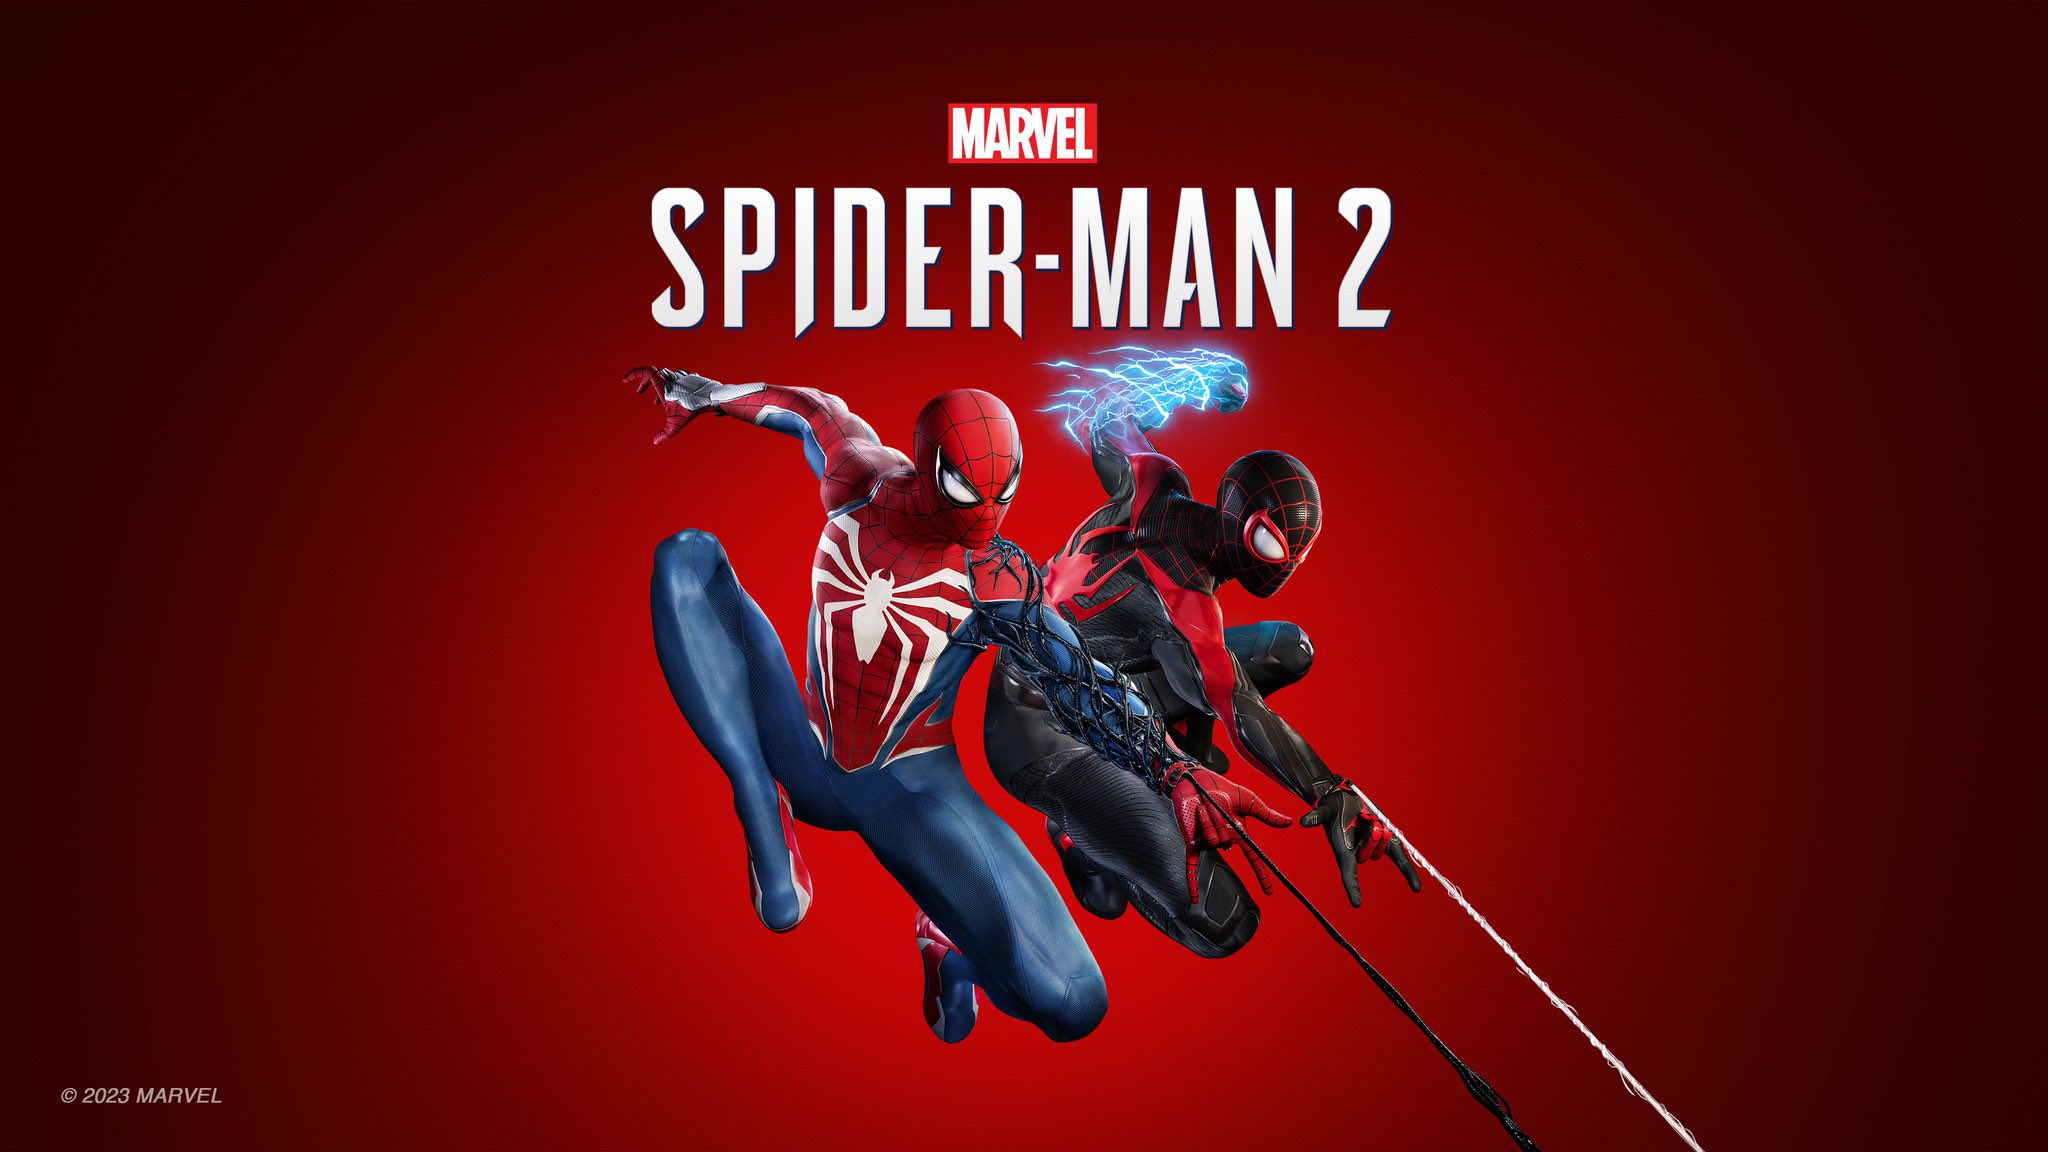 ‘Marvel’s Spider-Man 2’ Is Another Triumph From Insomniac Games- Review